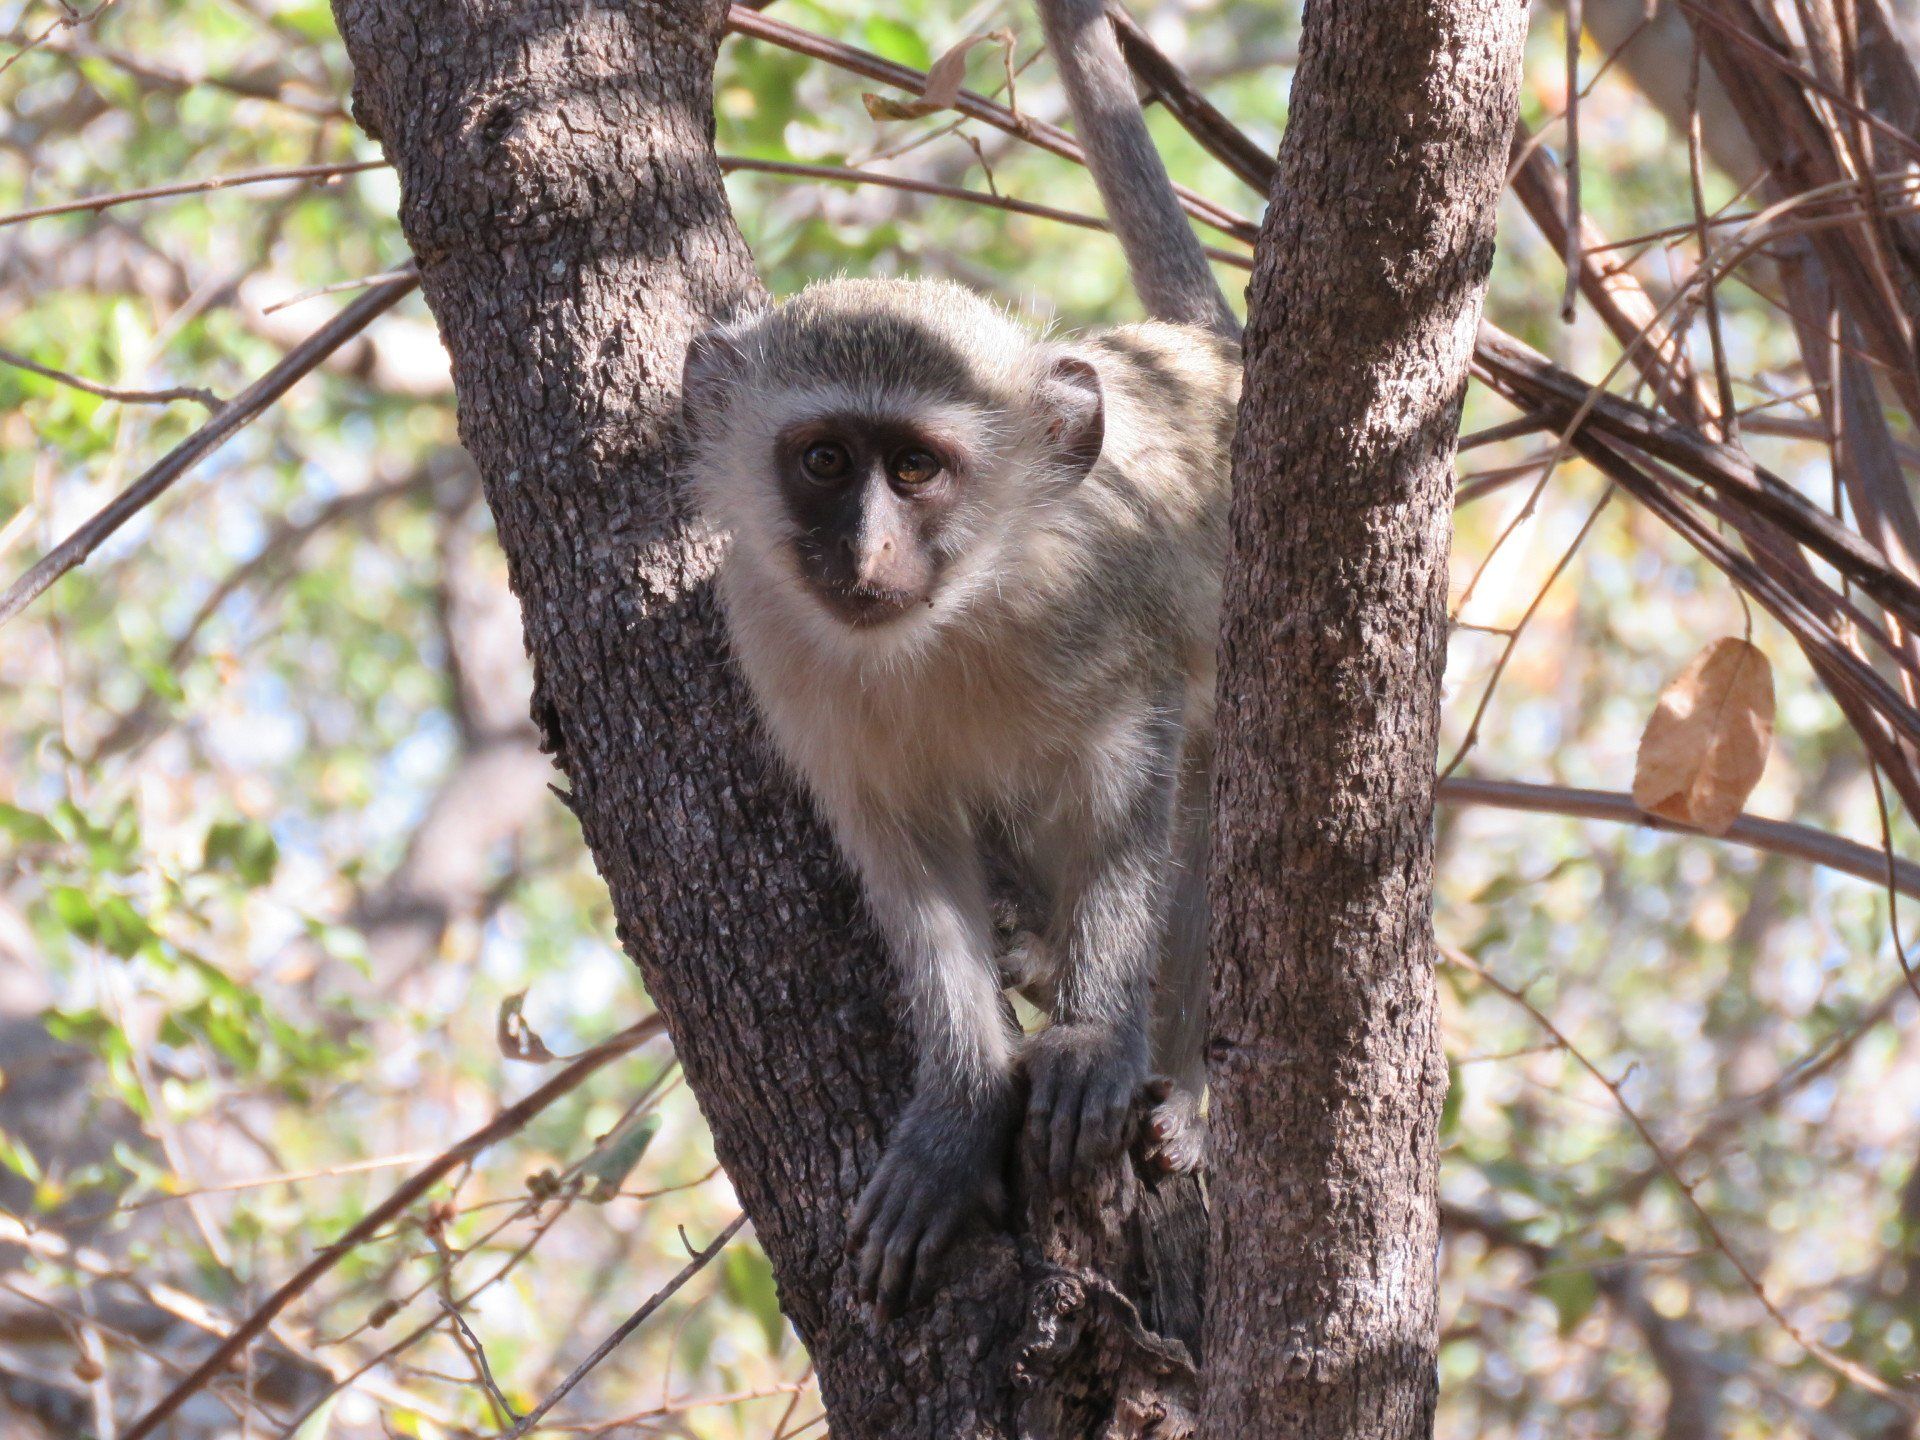 a small monkey sitting in a tree looking at the camera